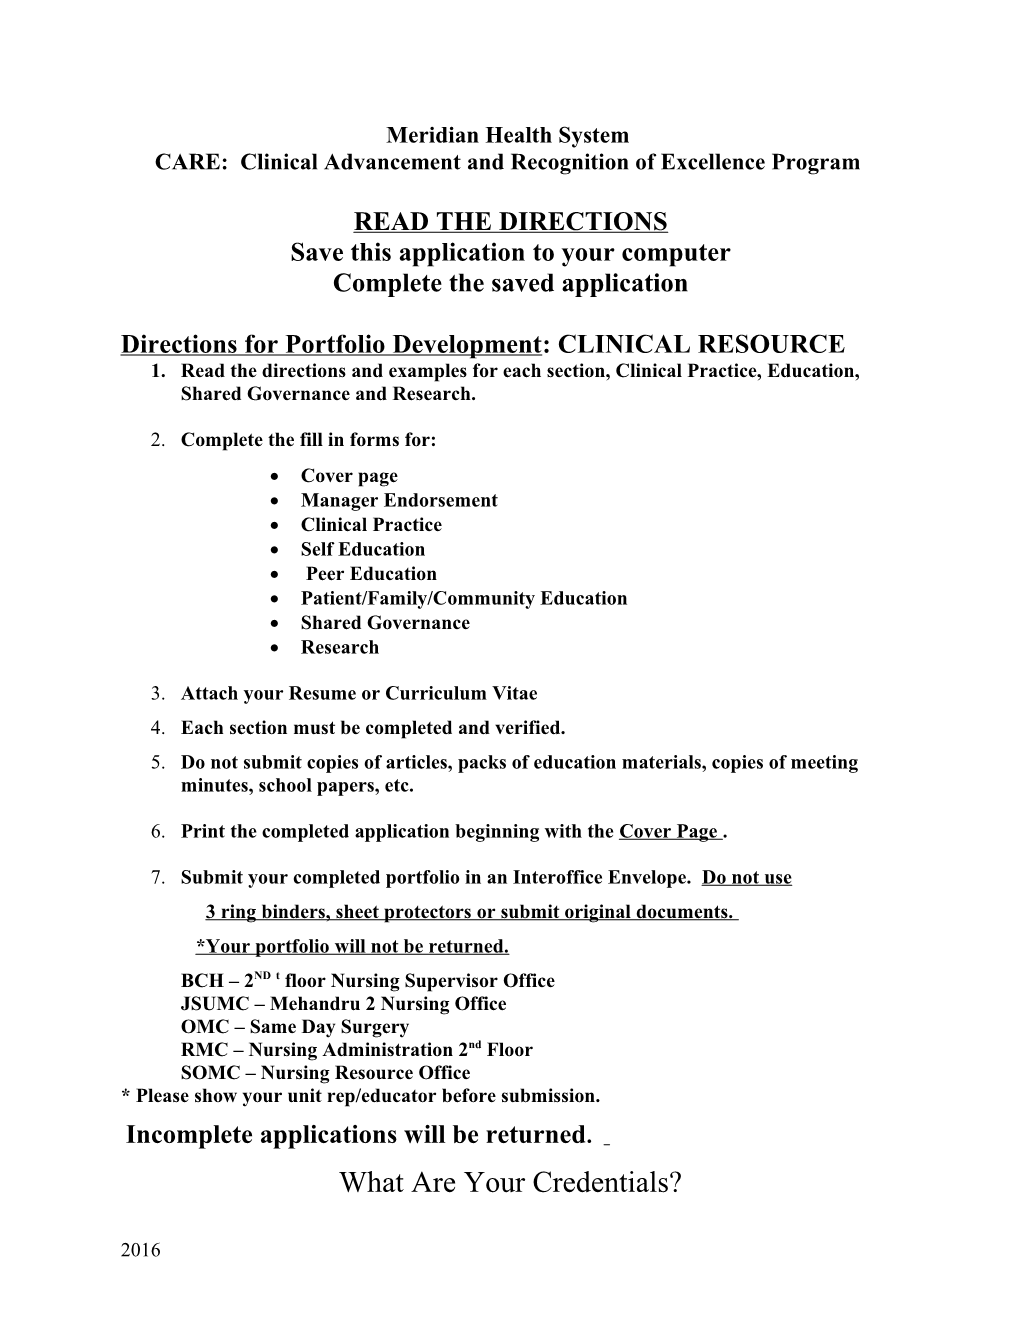 CARE: Clinical Advancement and Recognition of Excellence Program